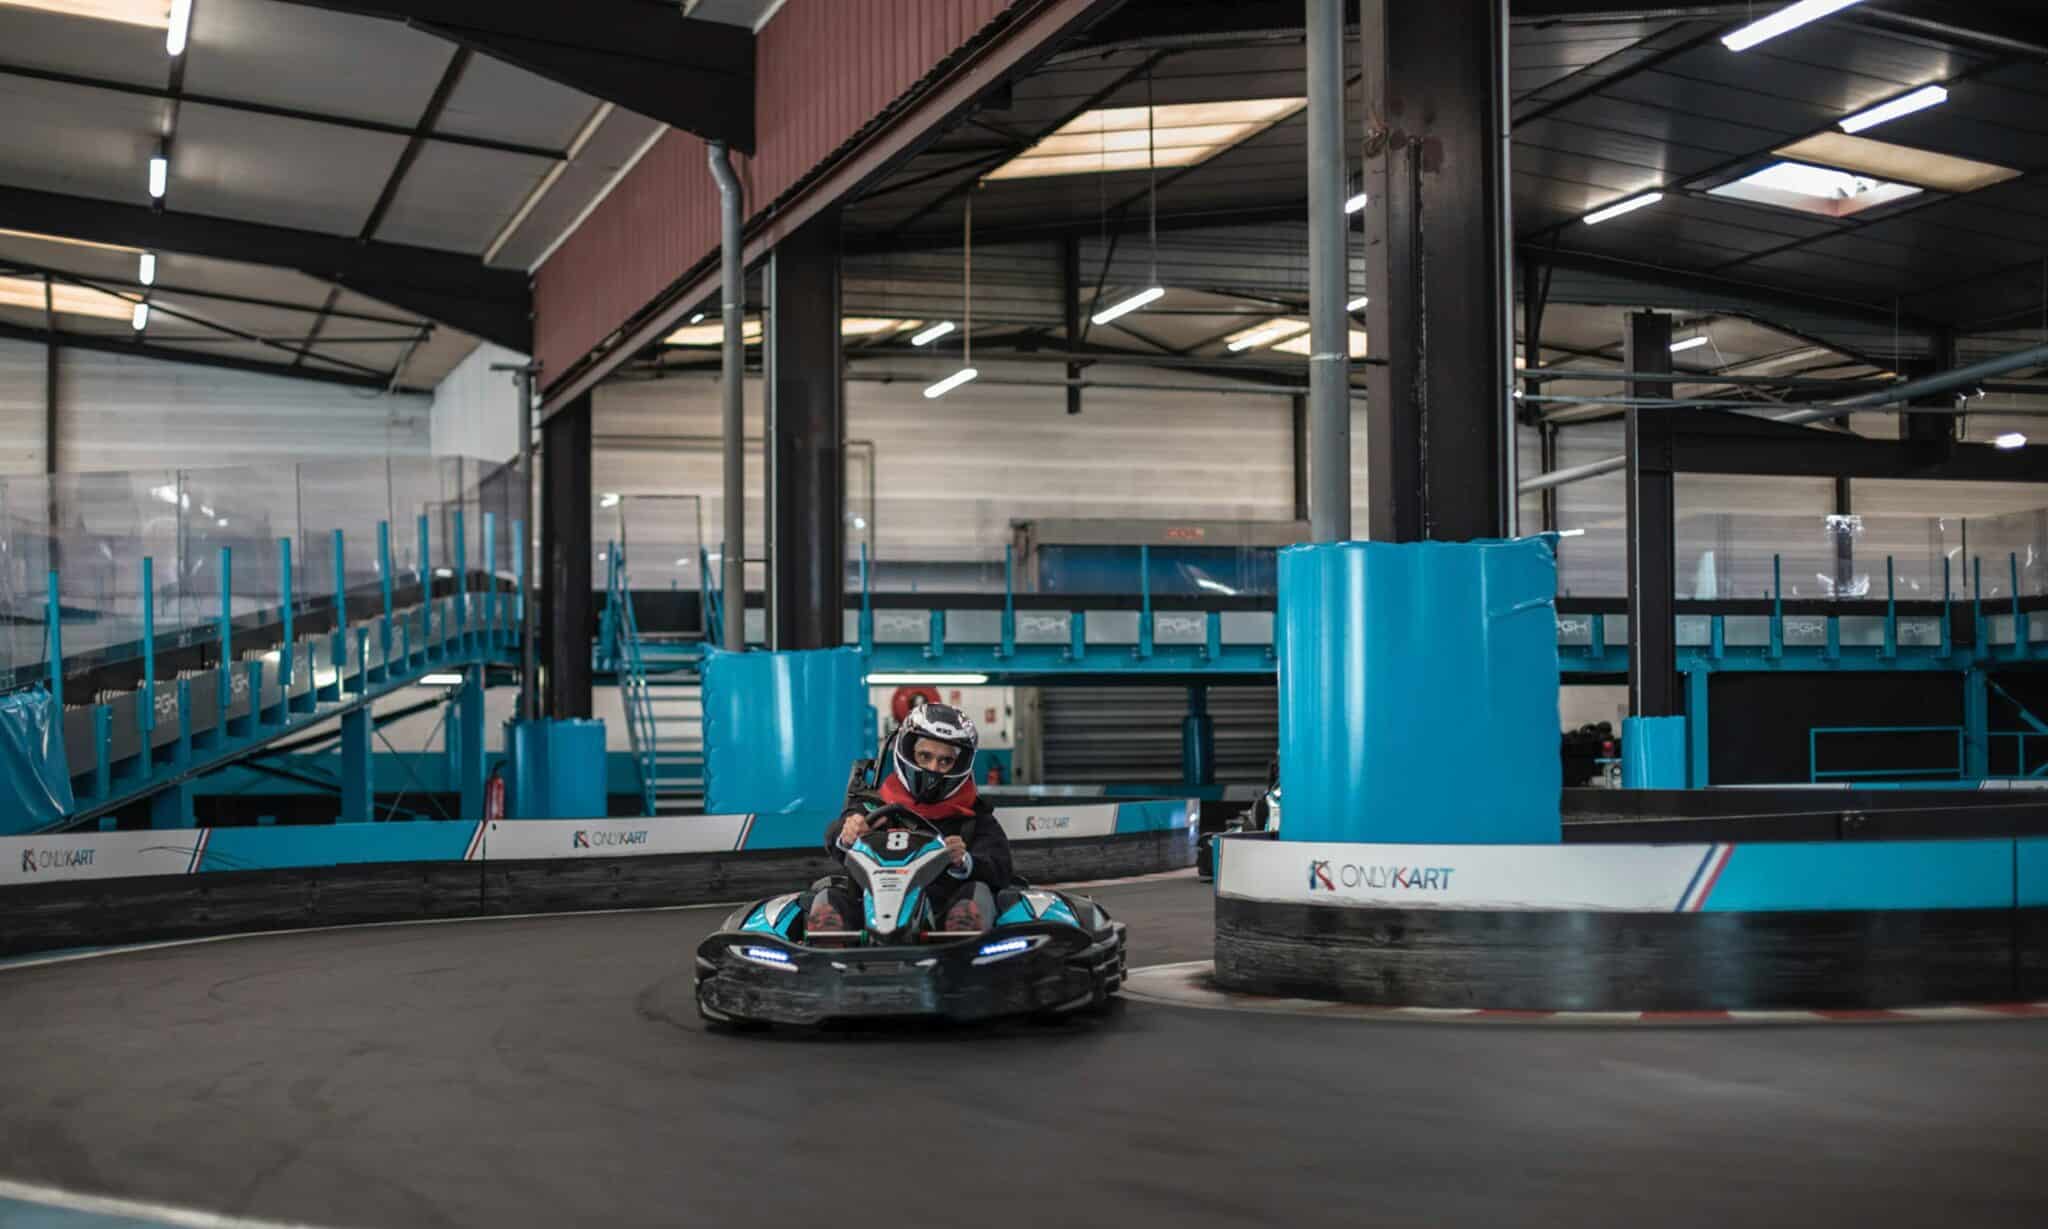 a person riding a go - kart in a building